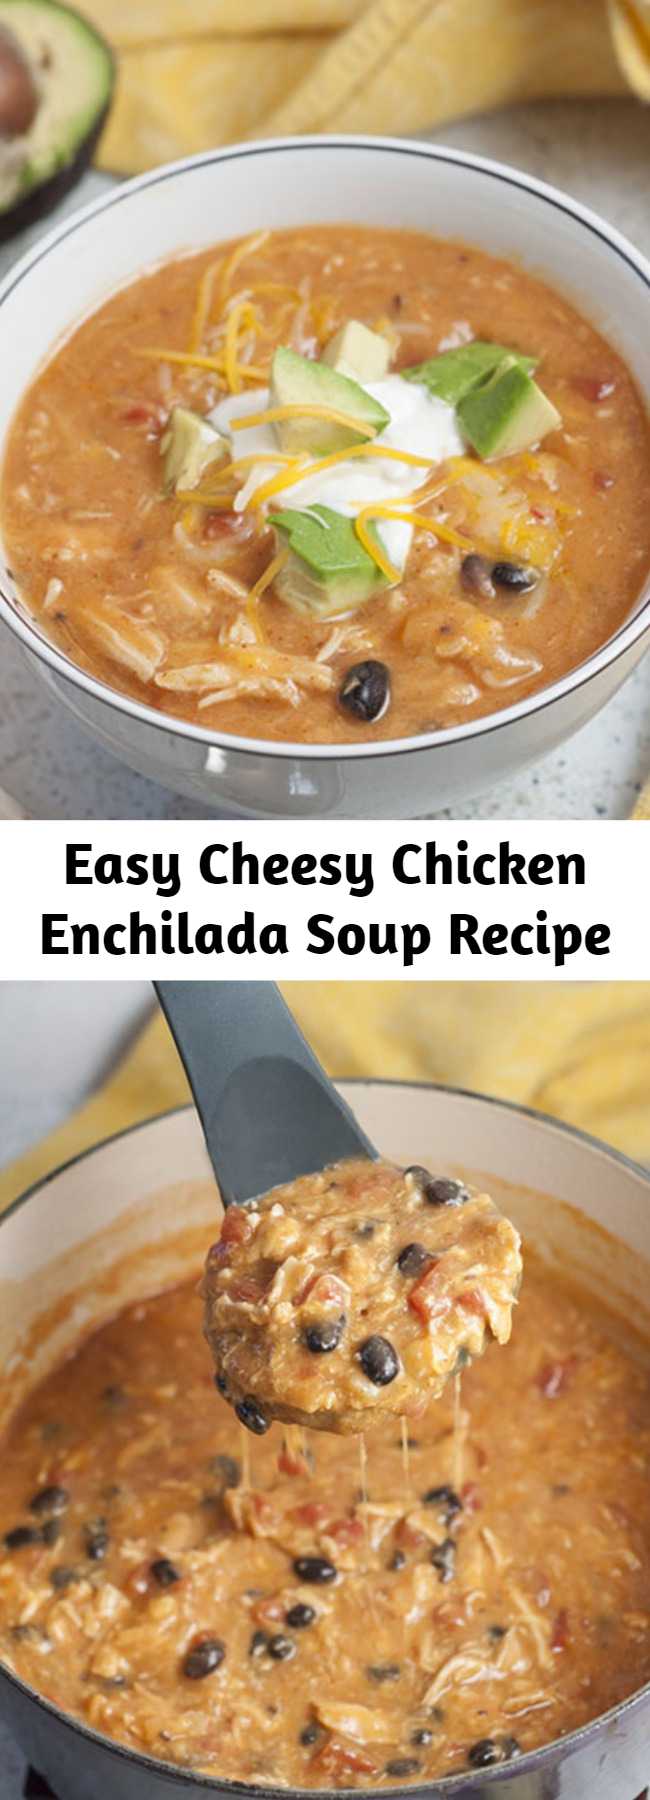 Easy Cheesy Chicken Enchilada Soup Recipe - Flavorful and filling 20 Minute Cheesy Chicken Enchilada Soup recipe is super easy to cook up and full of the BEST flavors!